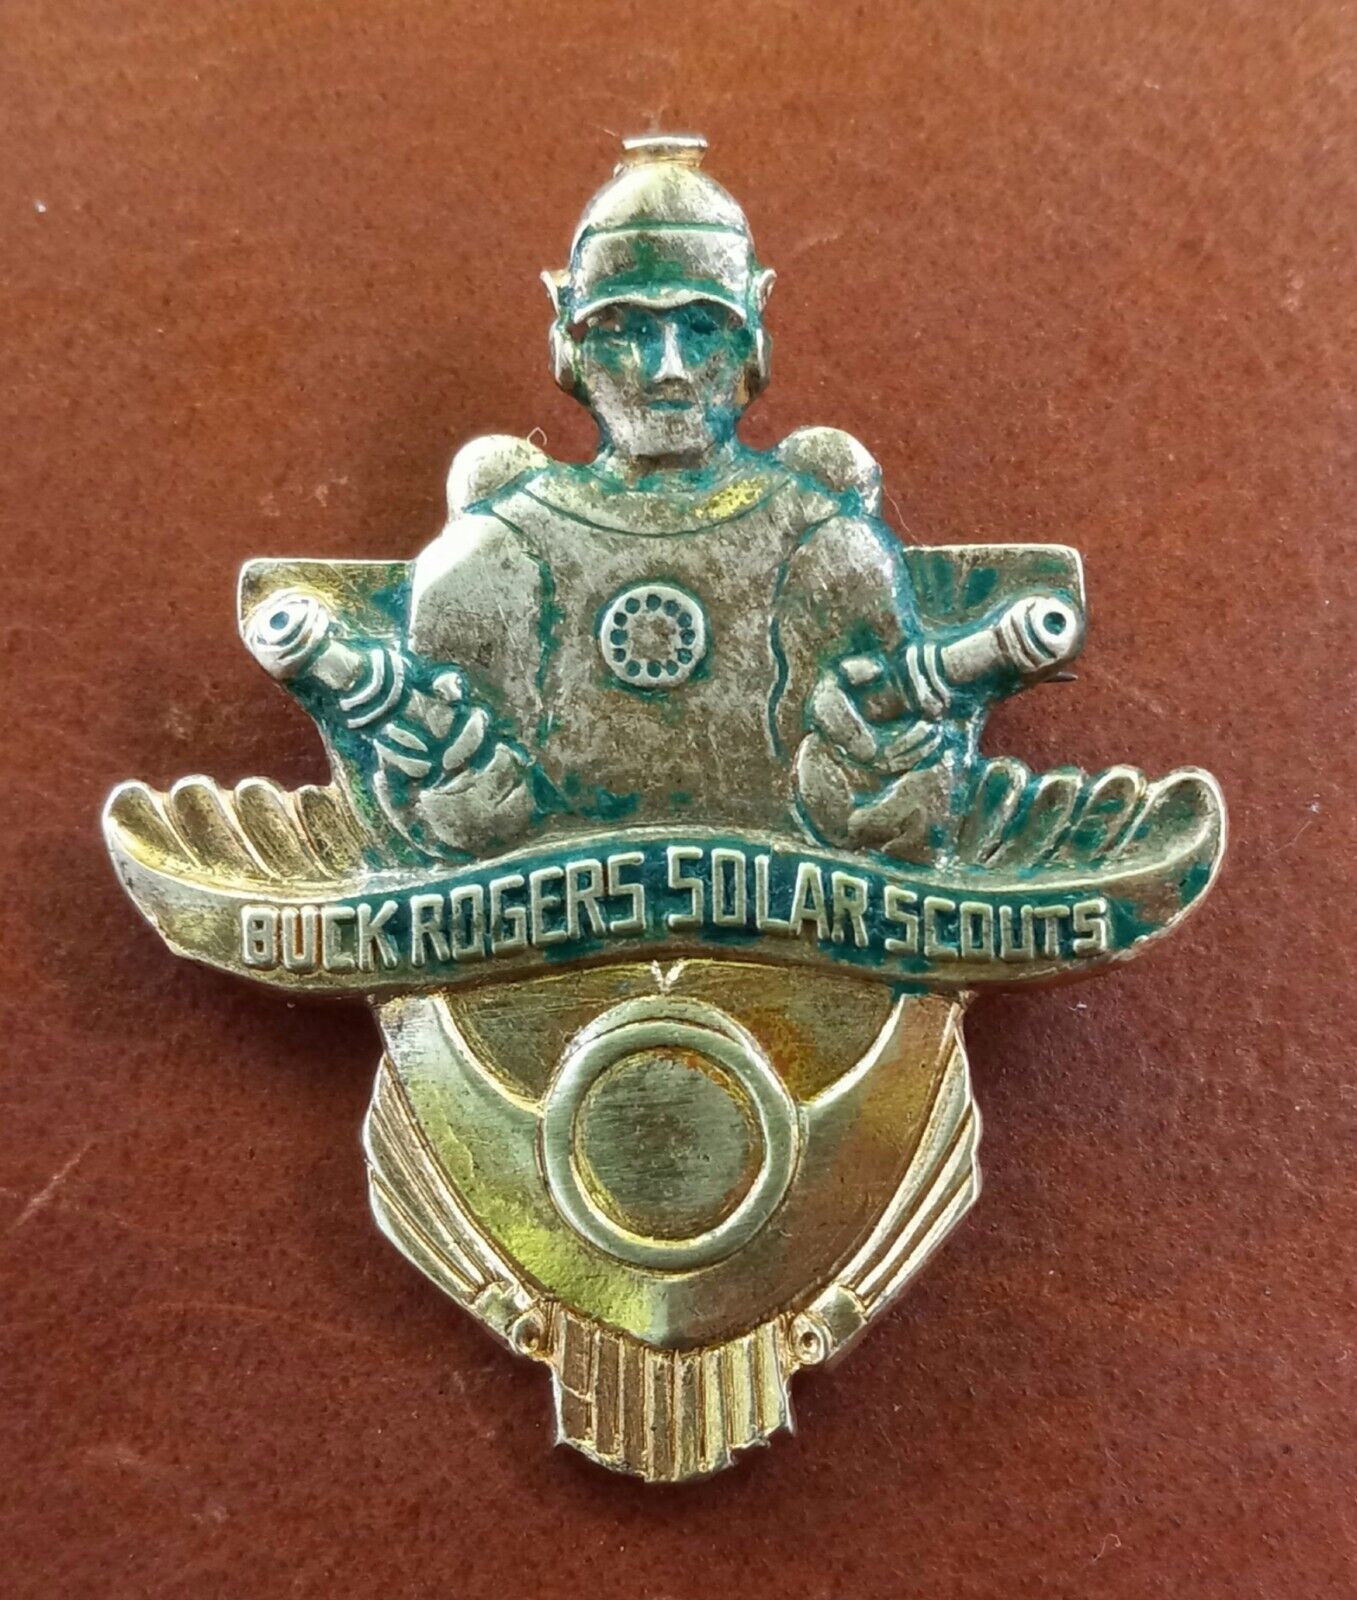 Vintage 1930s Buck Rogers Solar Scouts Brass Pin Badge